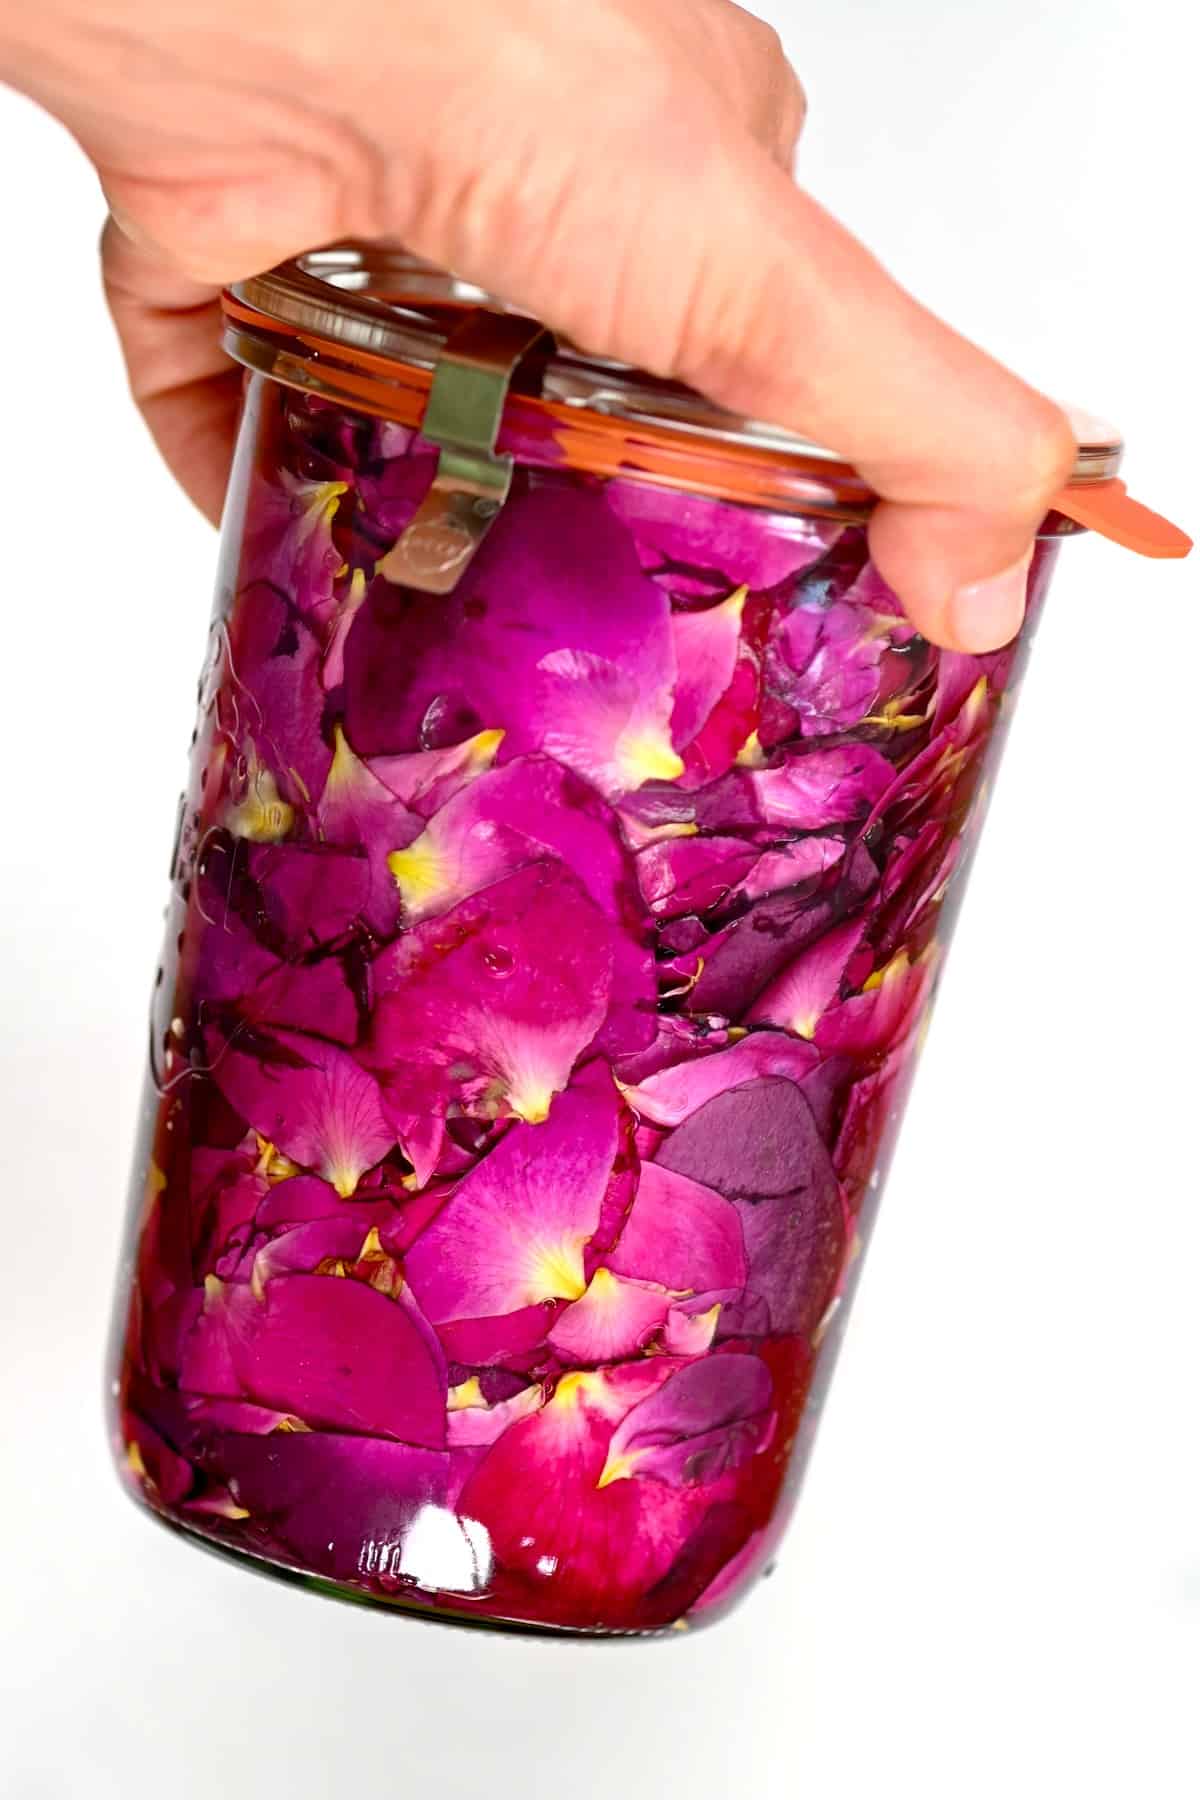 Hand holding Rose Extract mixture in a glass container